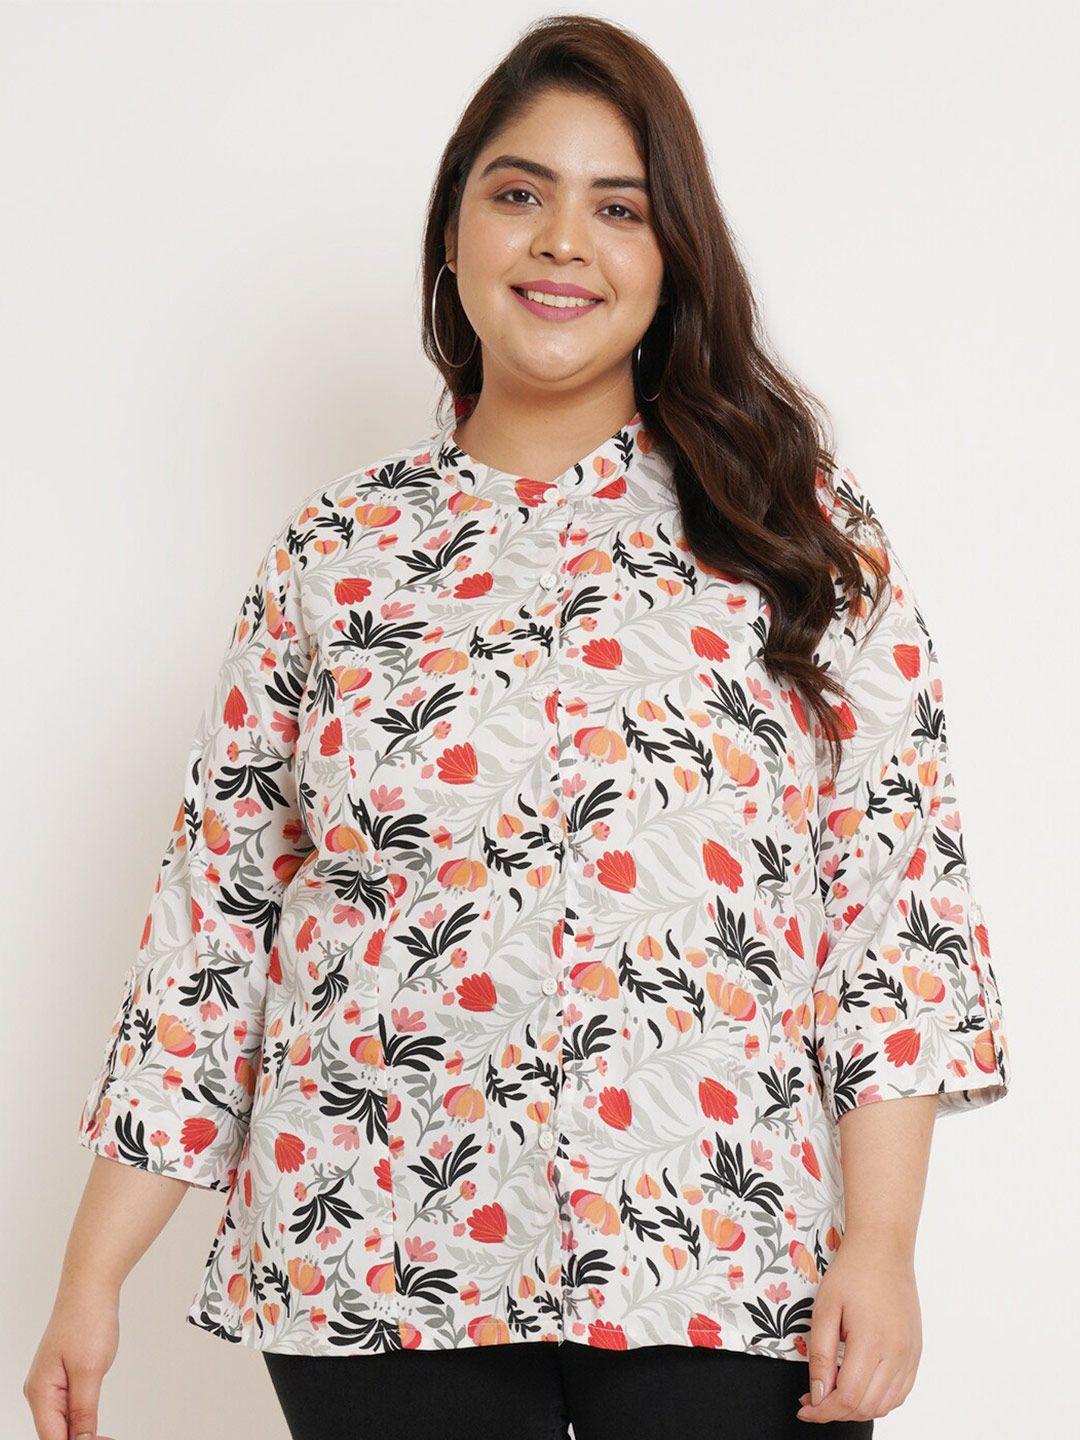 u&f beyond plus size floral printed mandarin collar roll-up sleeves shirt style top